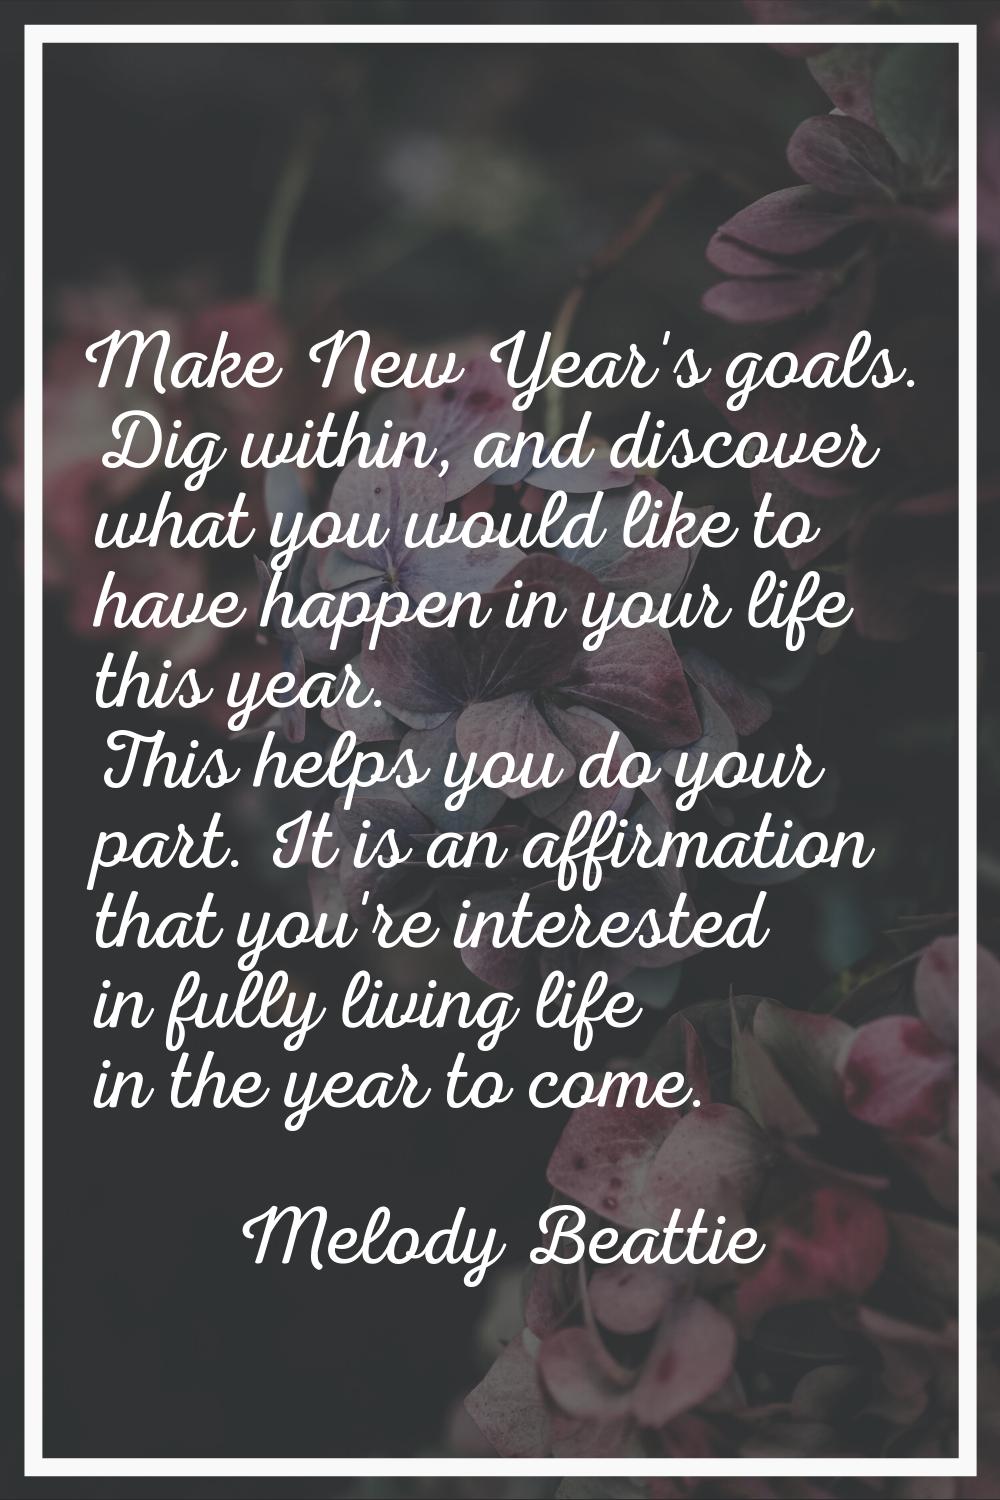 Make New Year's goals. Dig within, and discover what you would like to have happen in your life thi